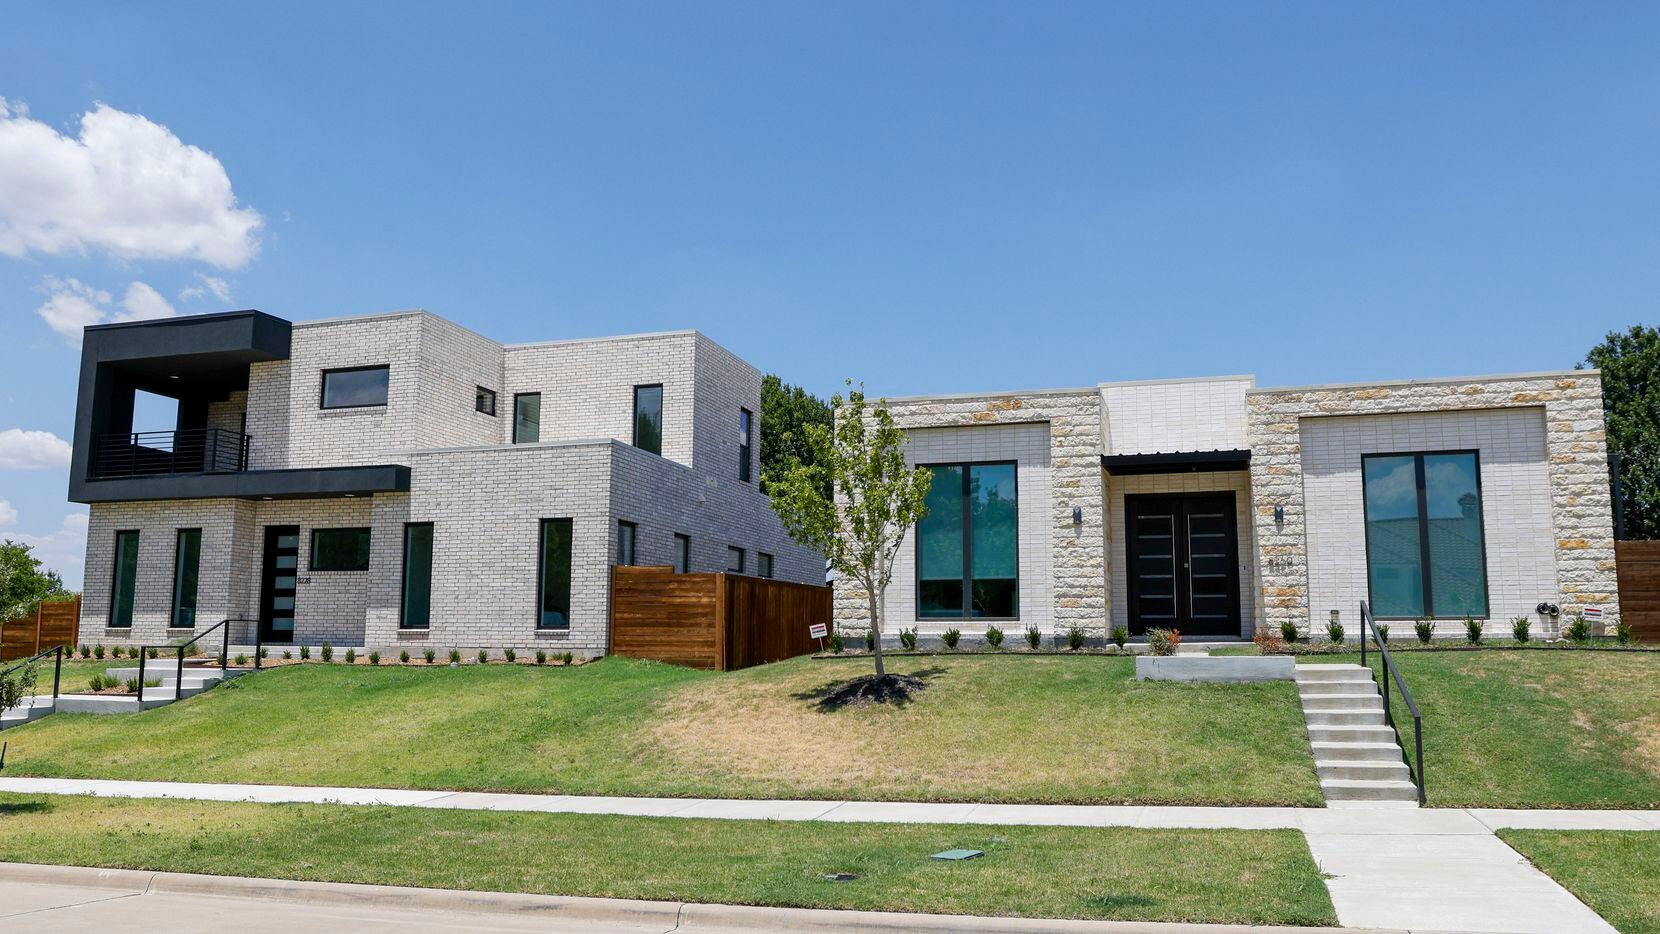 The home of Imran and Priya Vithani (left) pictured in Frisco, Texas, Friday, July 15, 2022.